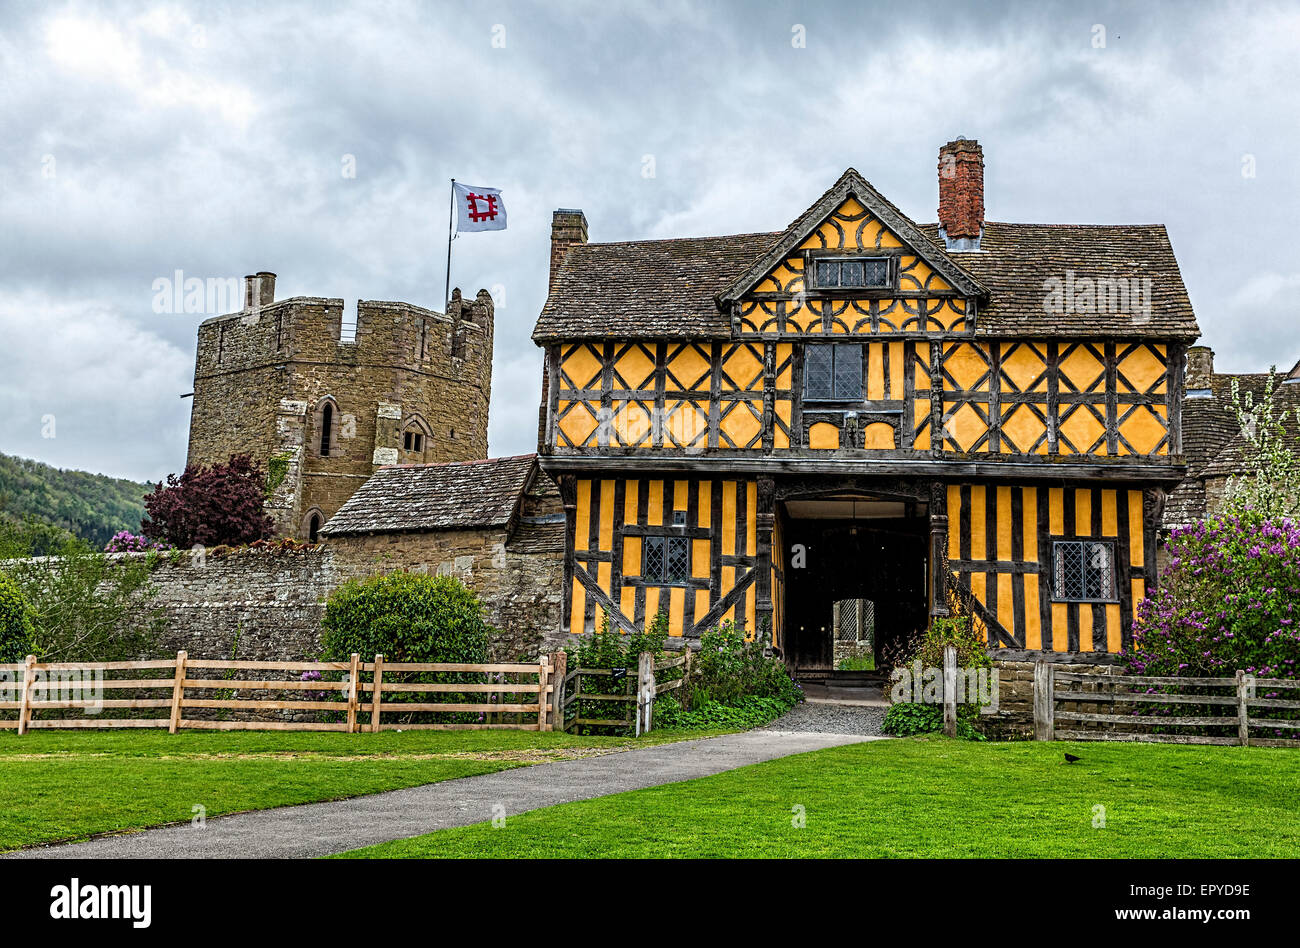 Timber framed gatehouse and stone South Tower at Stokesay Castle in Shropshire maintained by English Heritage Stock Photo